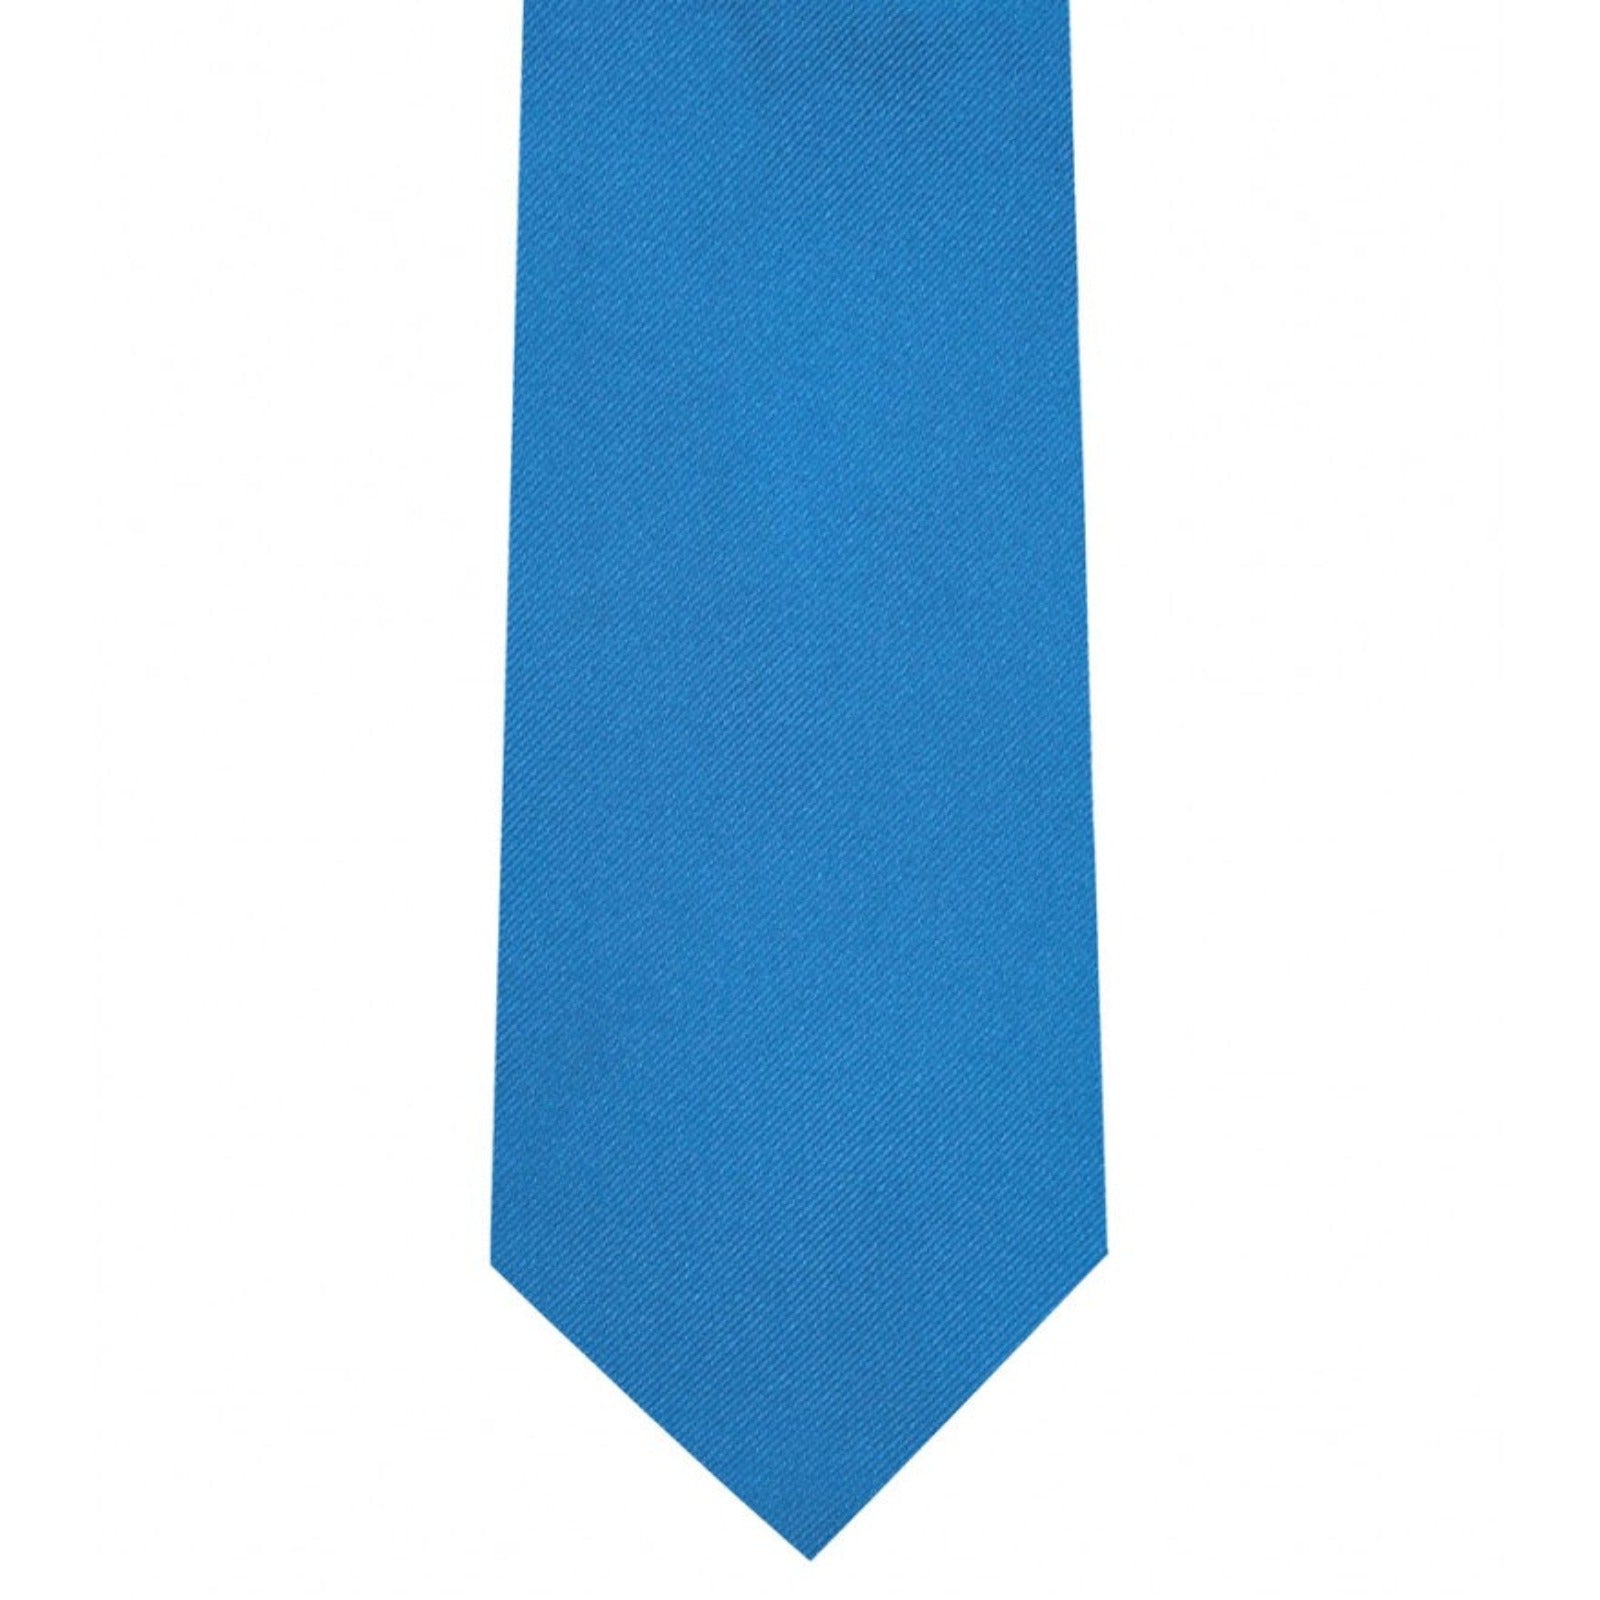 Classic French Blue Tie Ultra Skinny tie width 2.25 inches With Matching Pocket Square | KCT Menswear